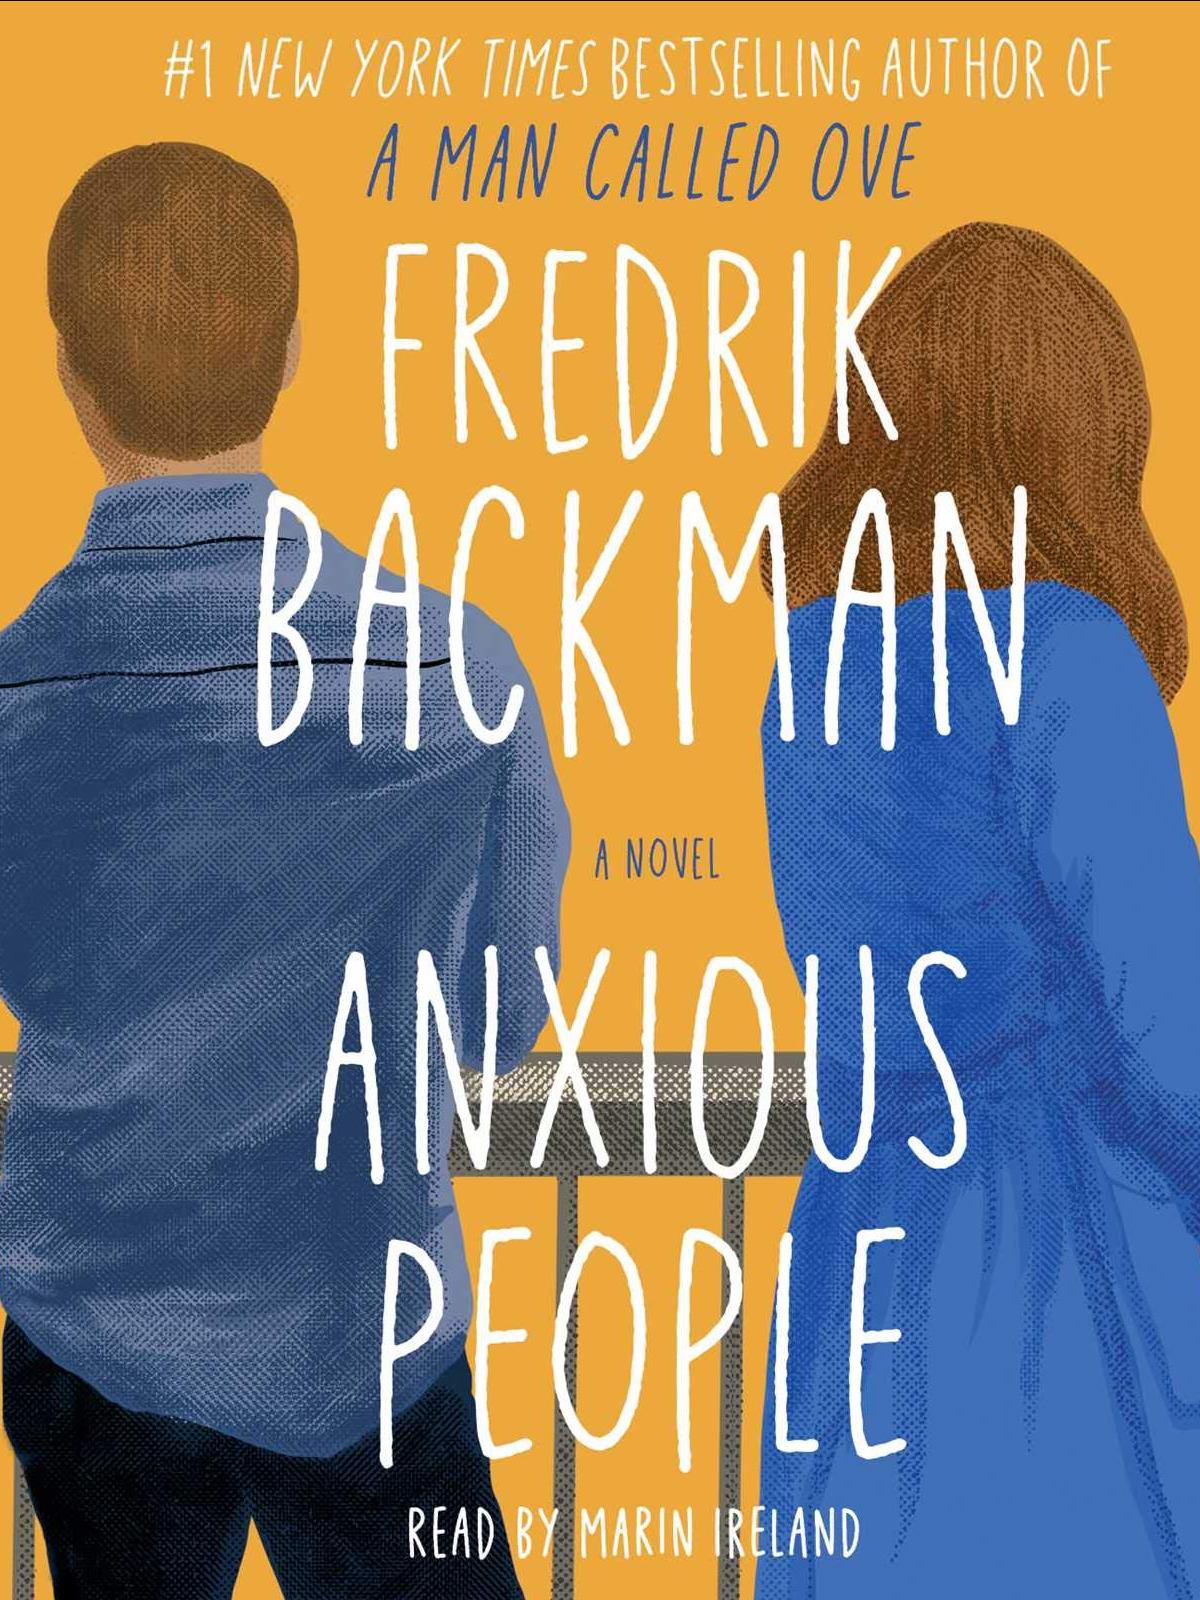 Book Discussion: Anxious People